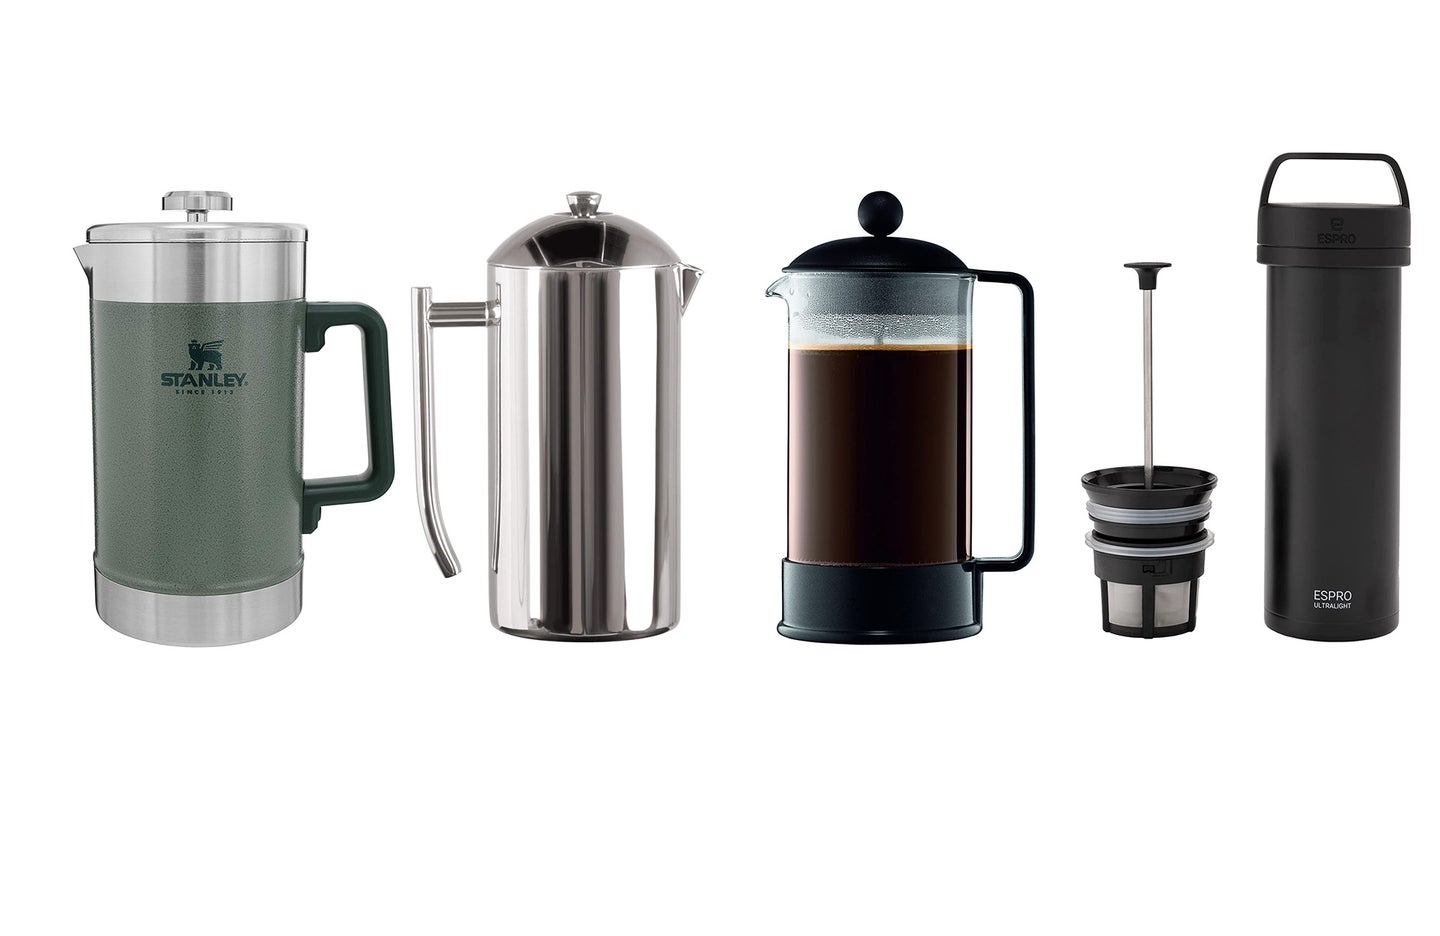 The best French press coffee makers will help you make a great cup without the fuss.